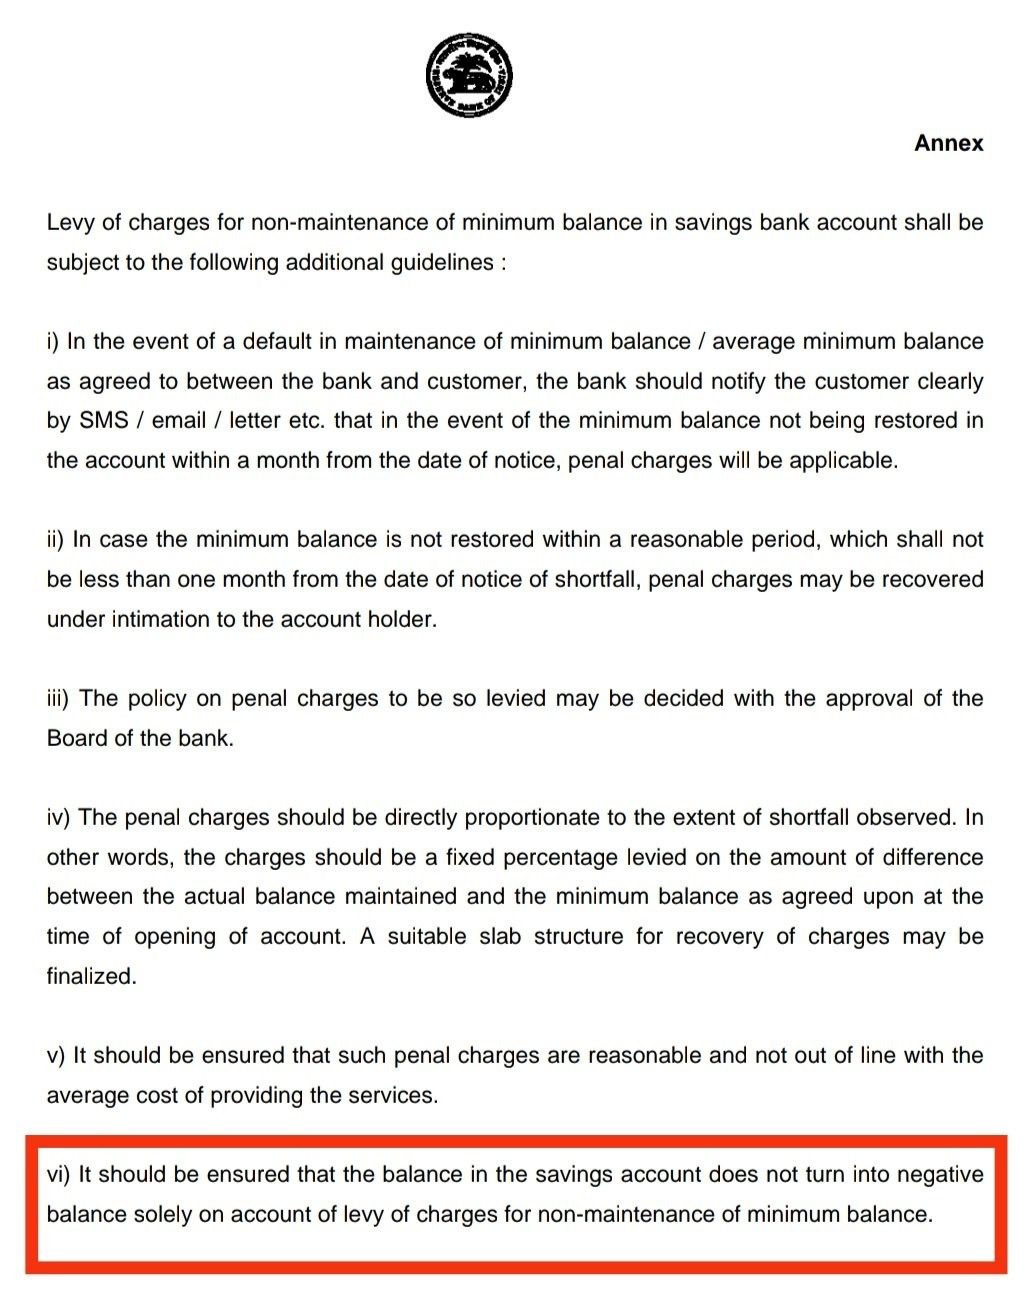 RBI announcement..! Now banks will not be able to charge interest even if there is negative balance, RBI issued new rule